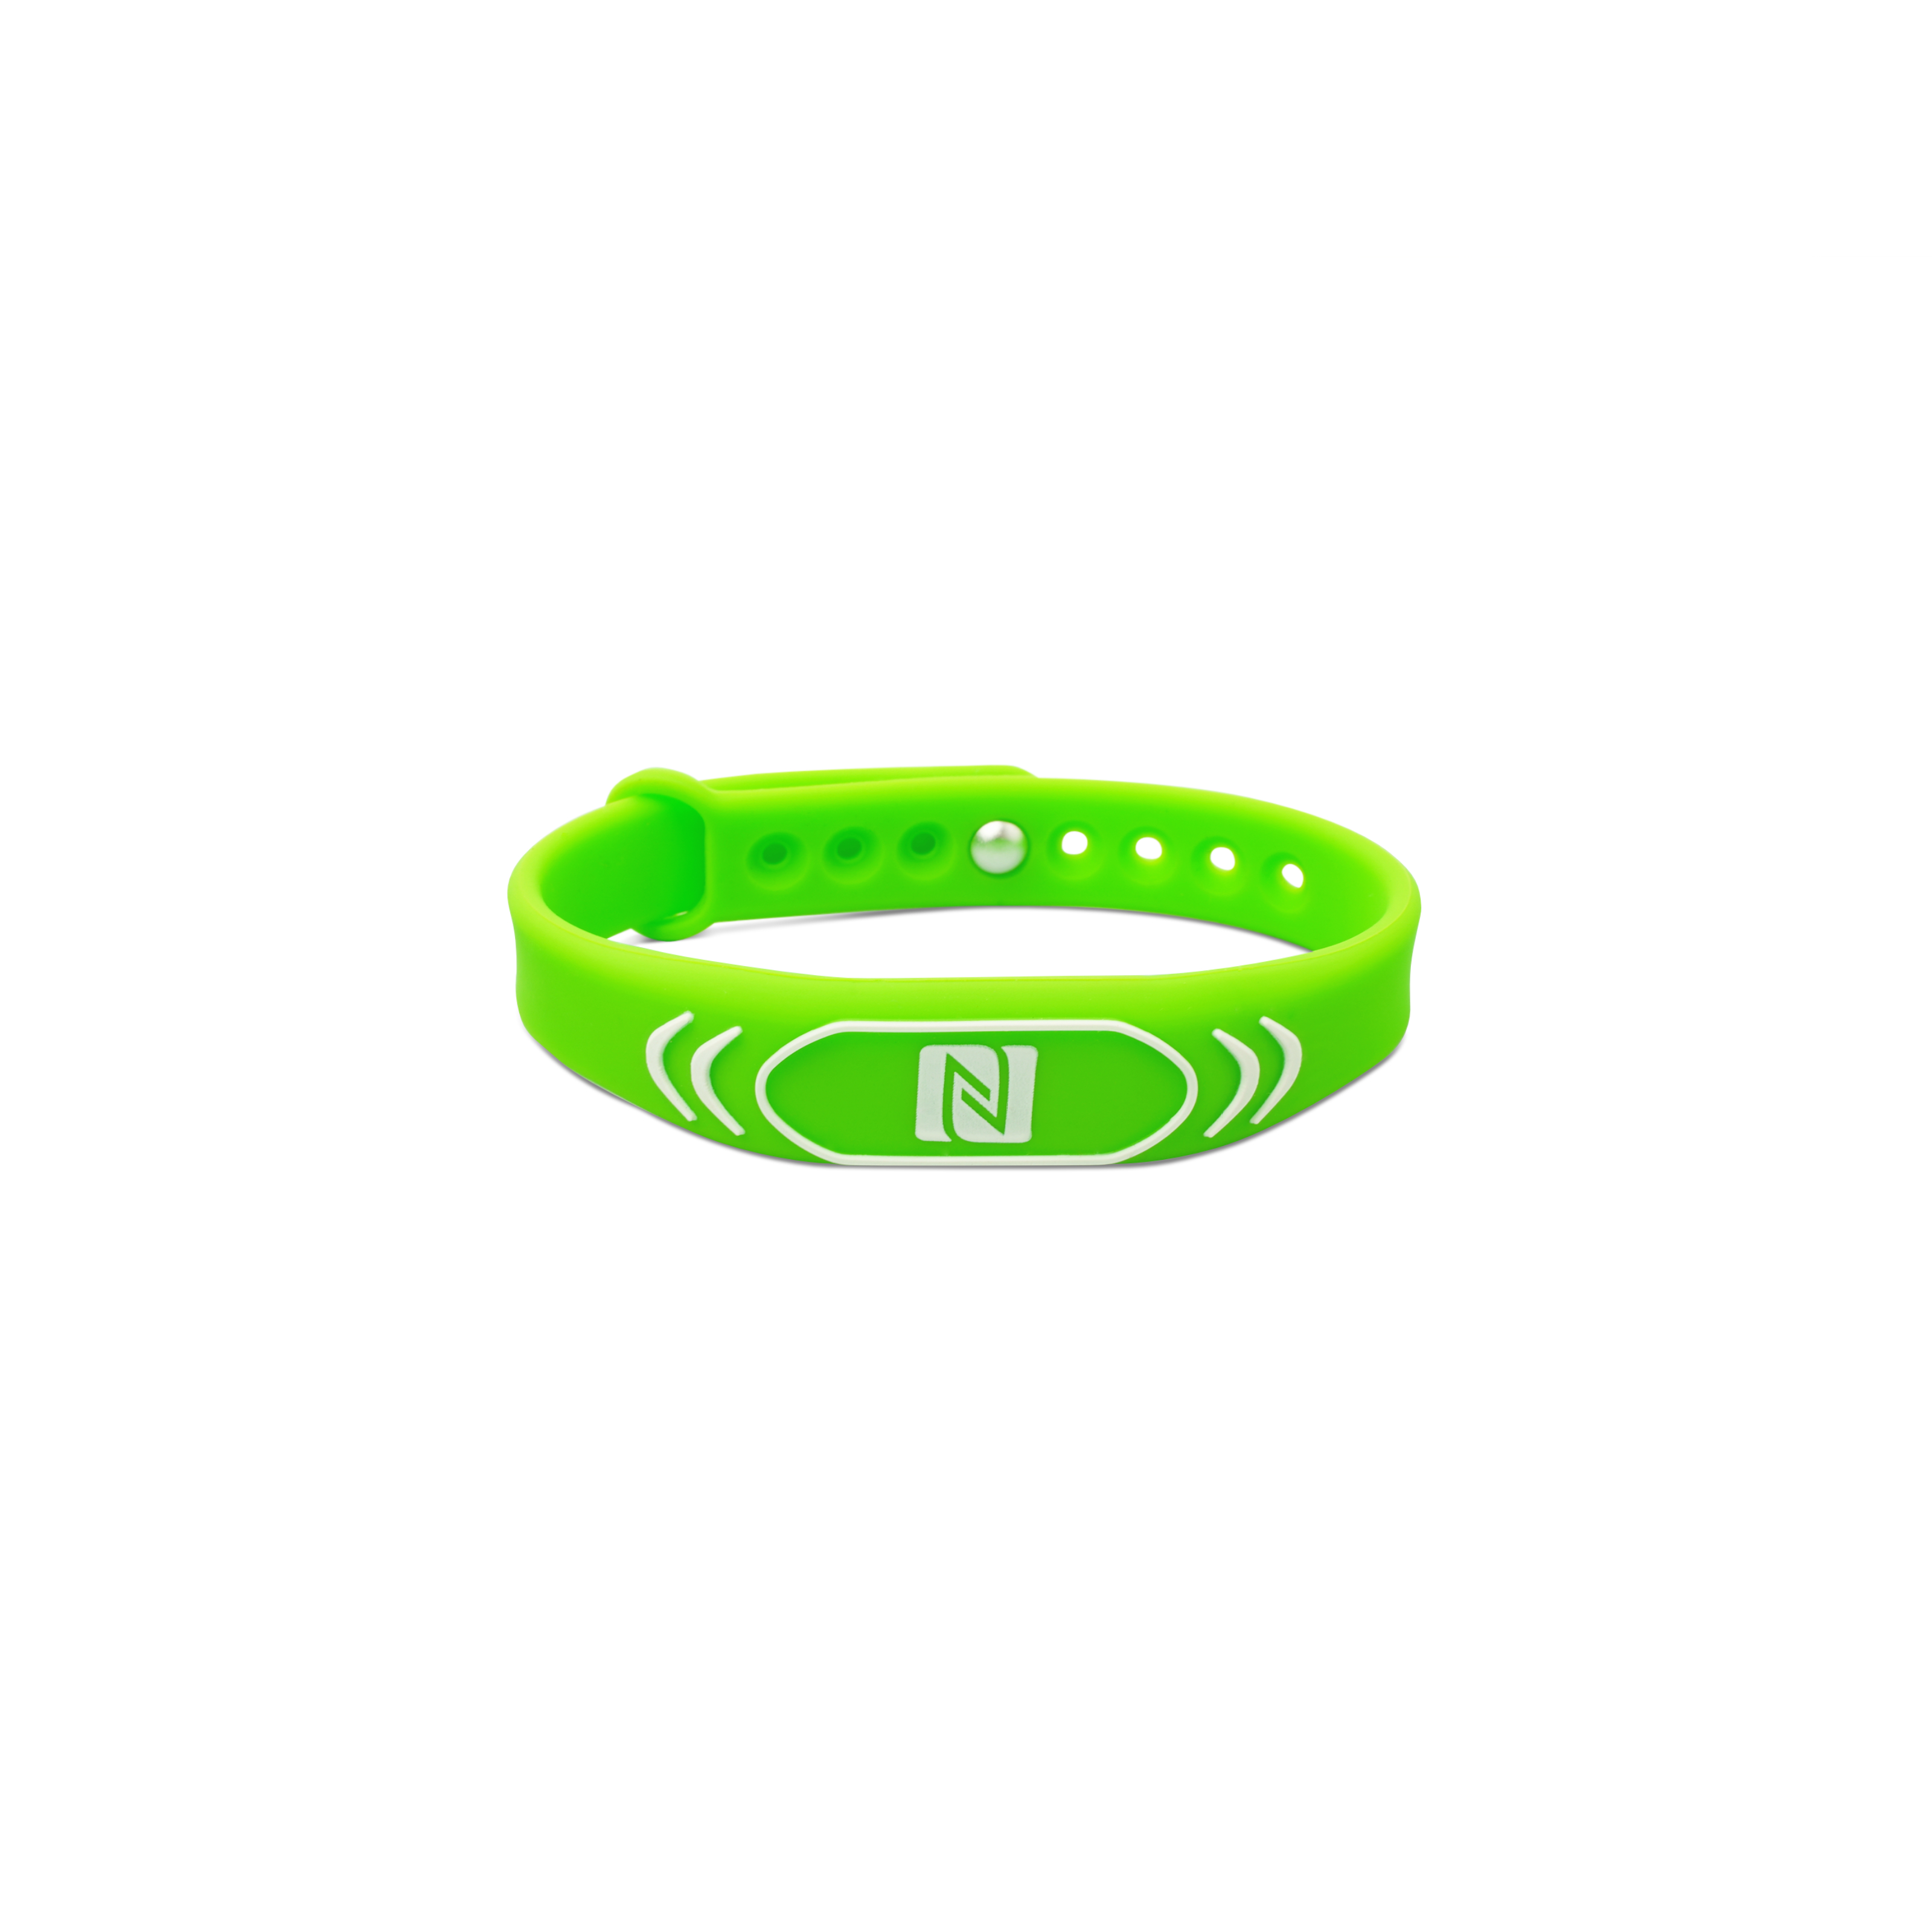 NFC Wristband Silicone - 235 x 15 x 7 mm - NTAG216 - 924 Byte - green